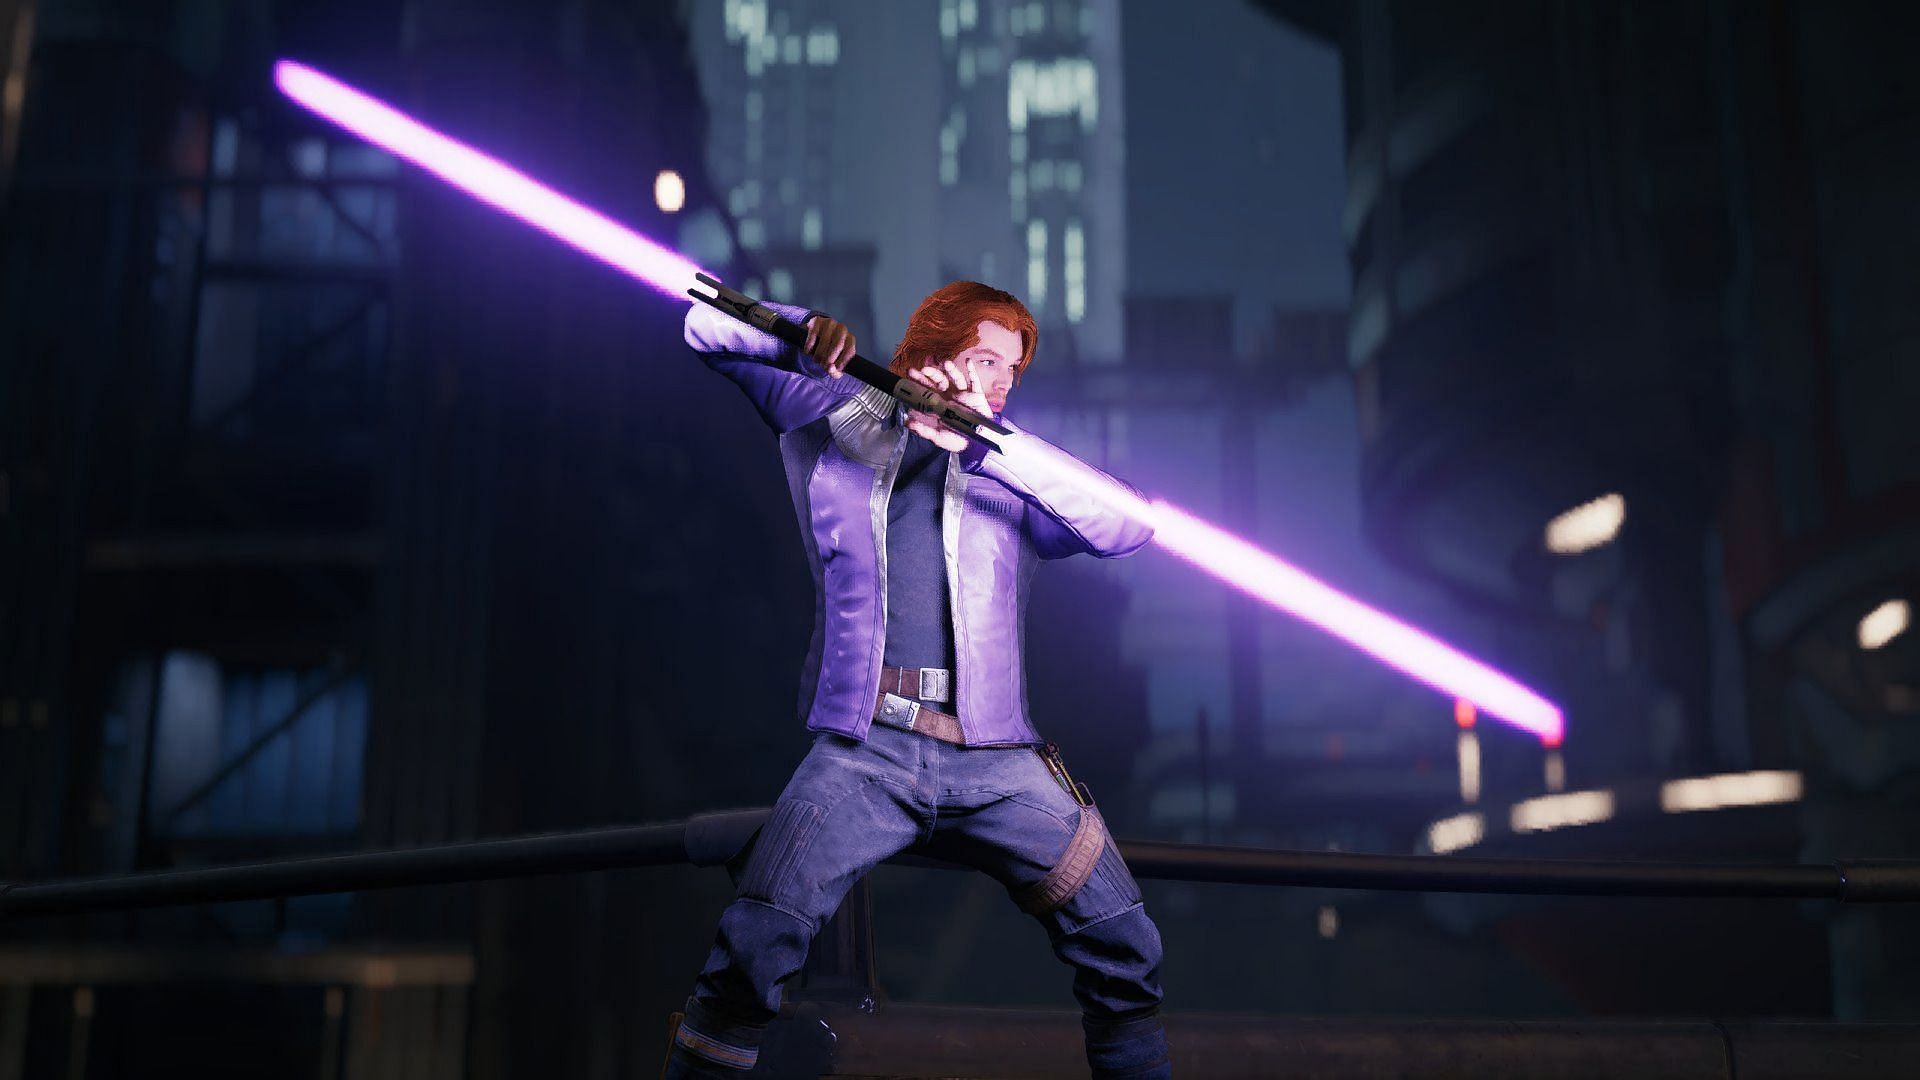 You must collect four components to get the Persistence lightsaber in Star Wars Jedi Survivor (Image via Electronic Arts)